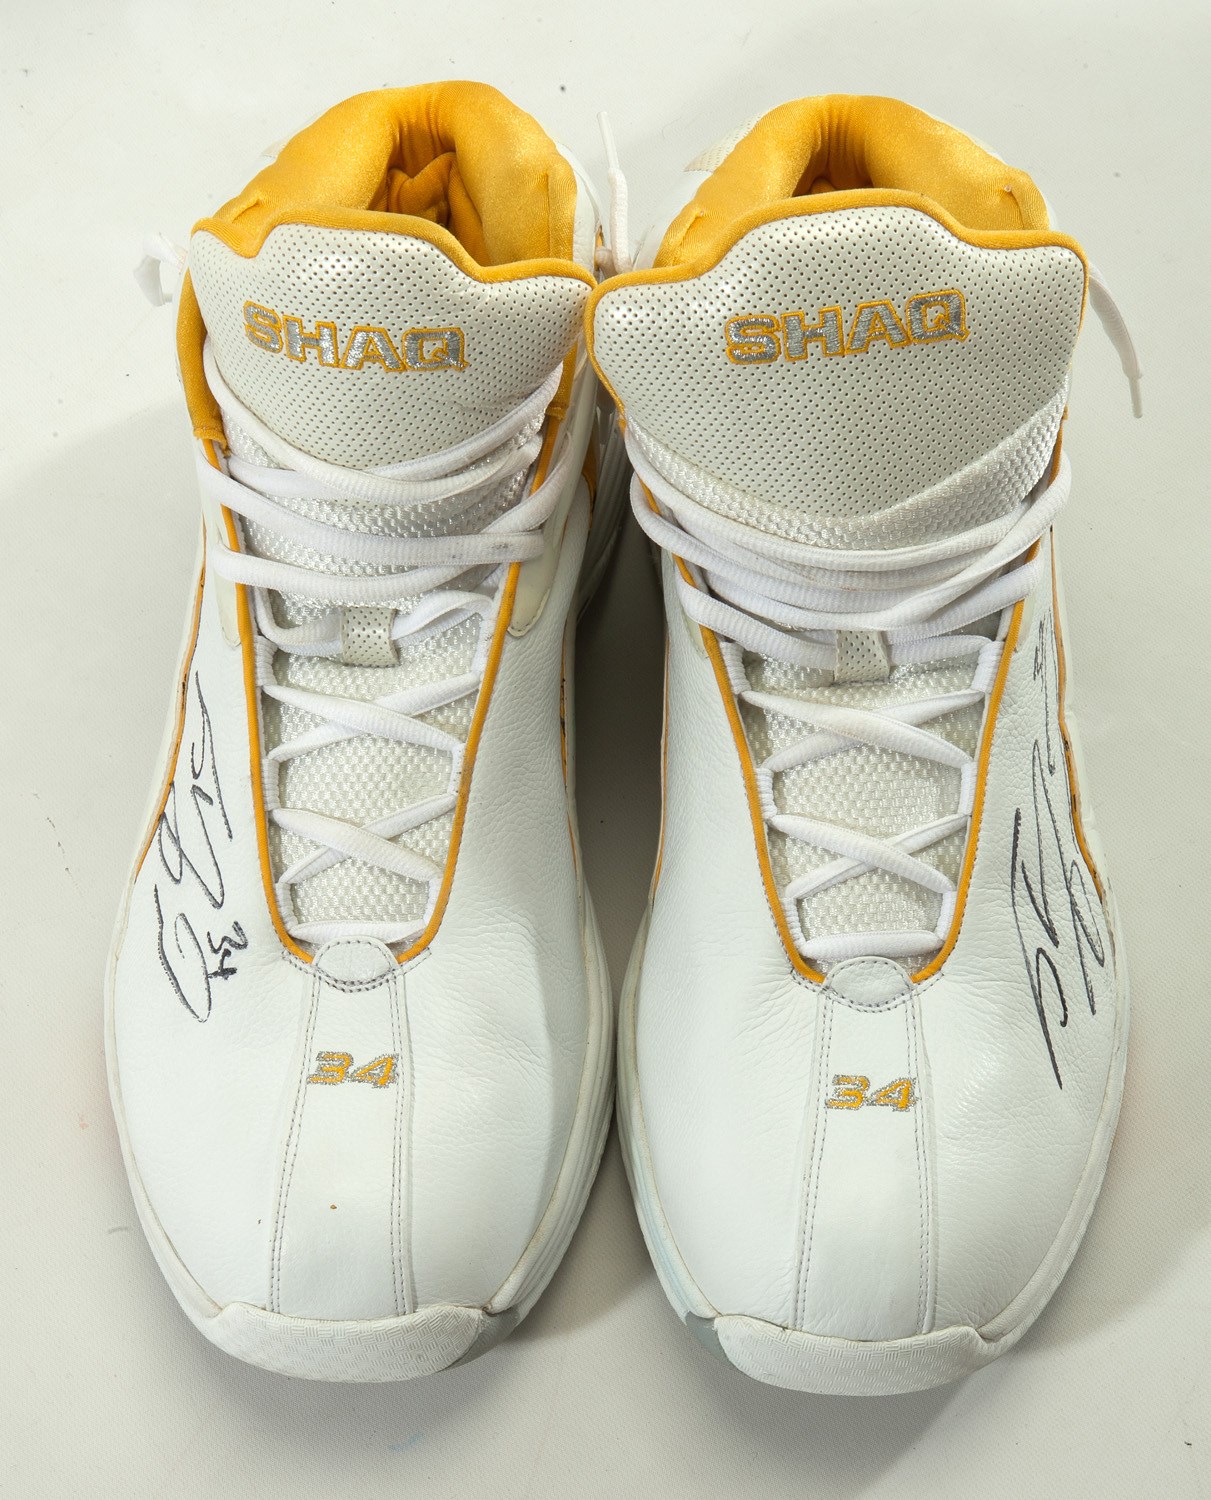 Shaq Shoes Shaquille O'Neal Game Worn Dual Signed Dunkman Signed